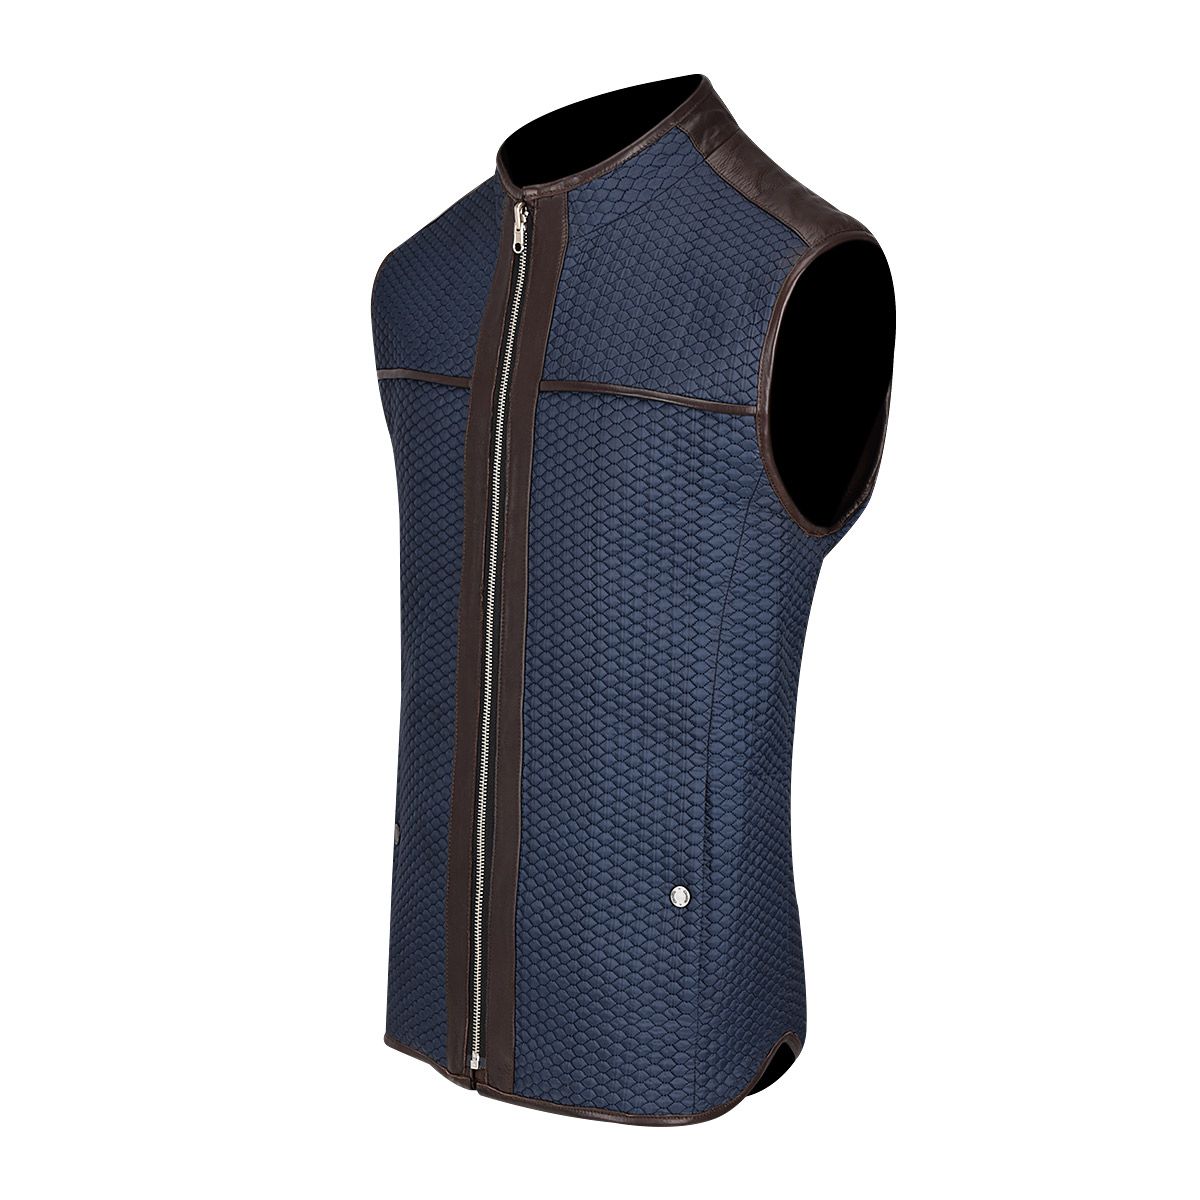 H303COC - Cuadra brown casual fashion reversible lambskin leather vest for men-Kuet.us